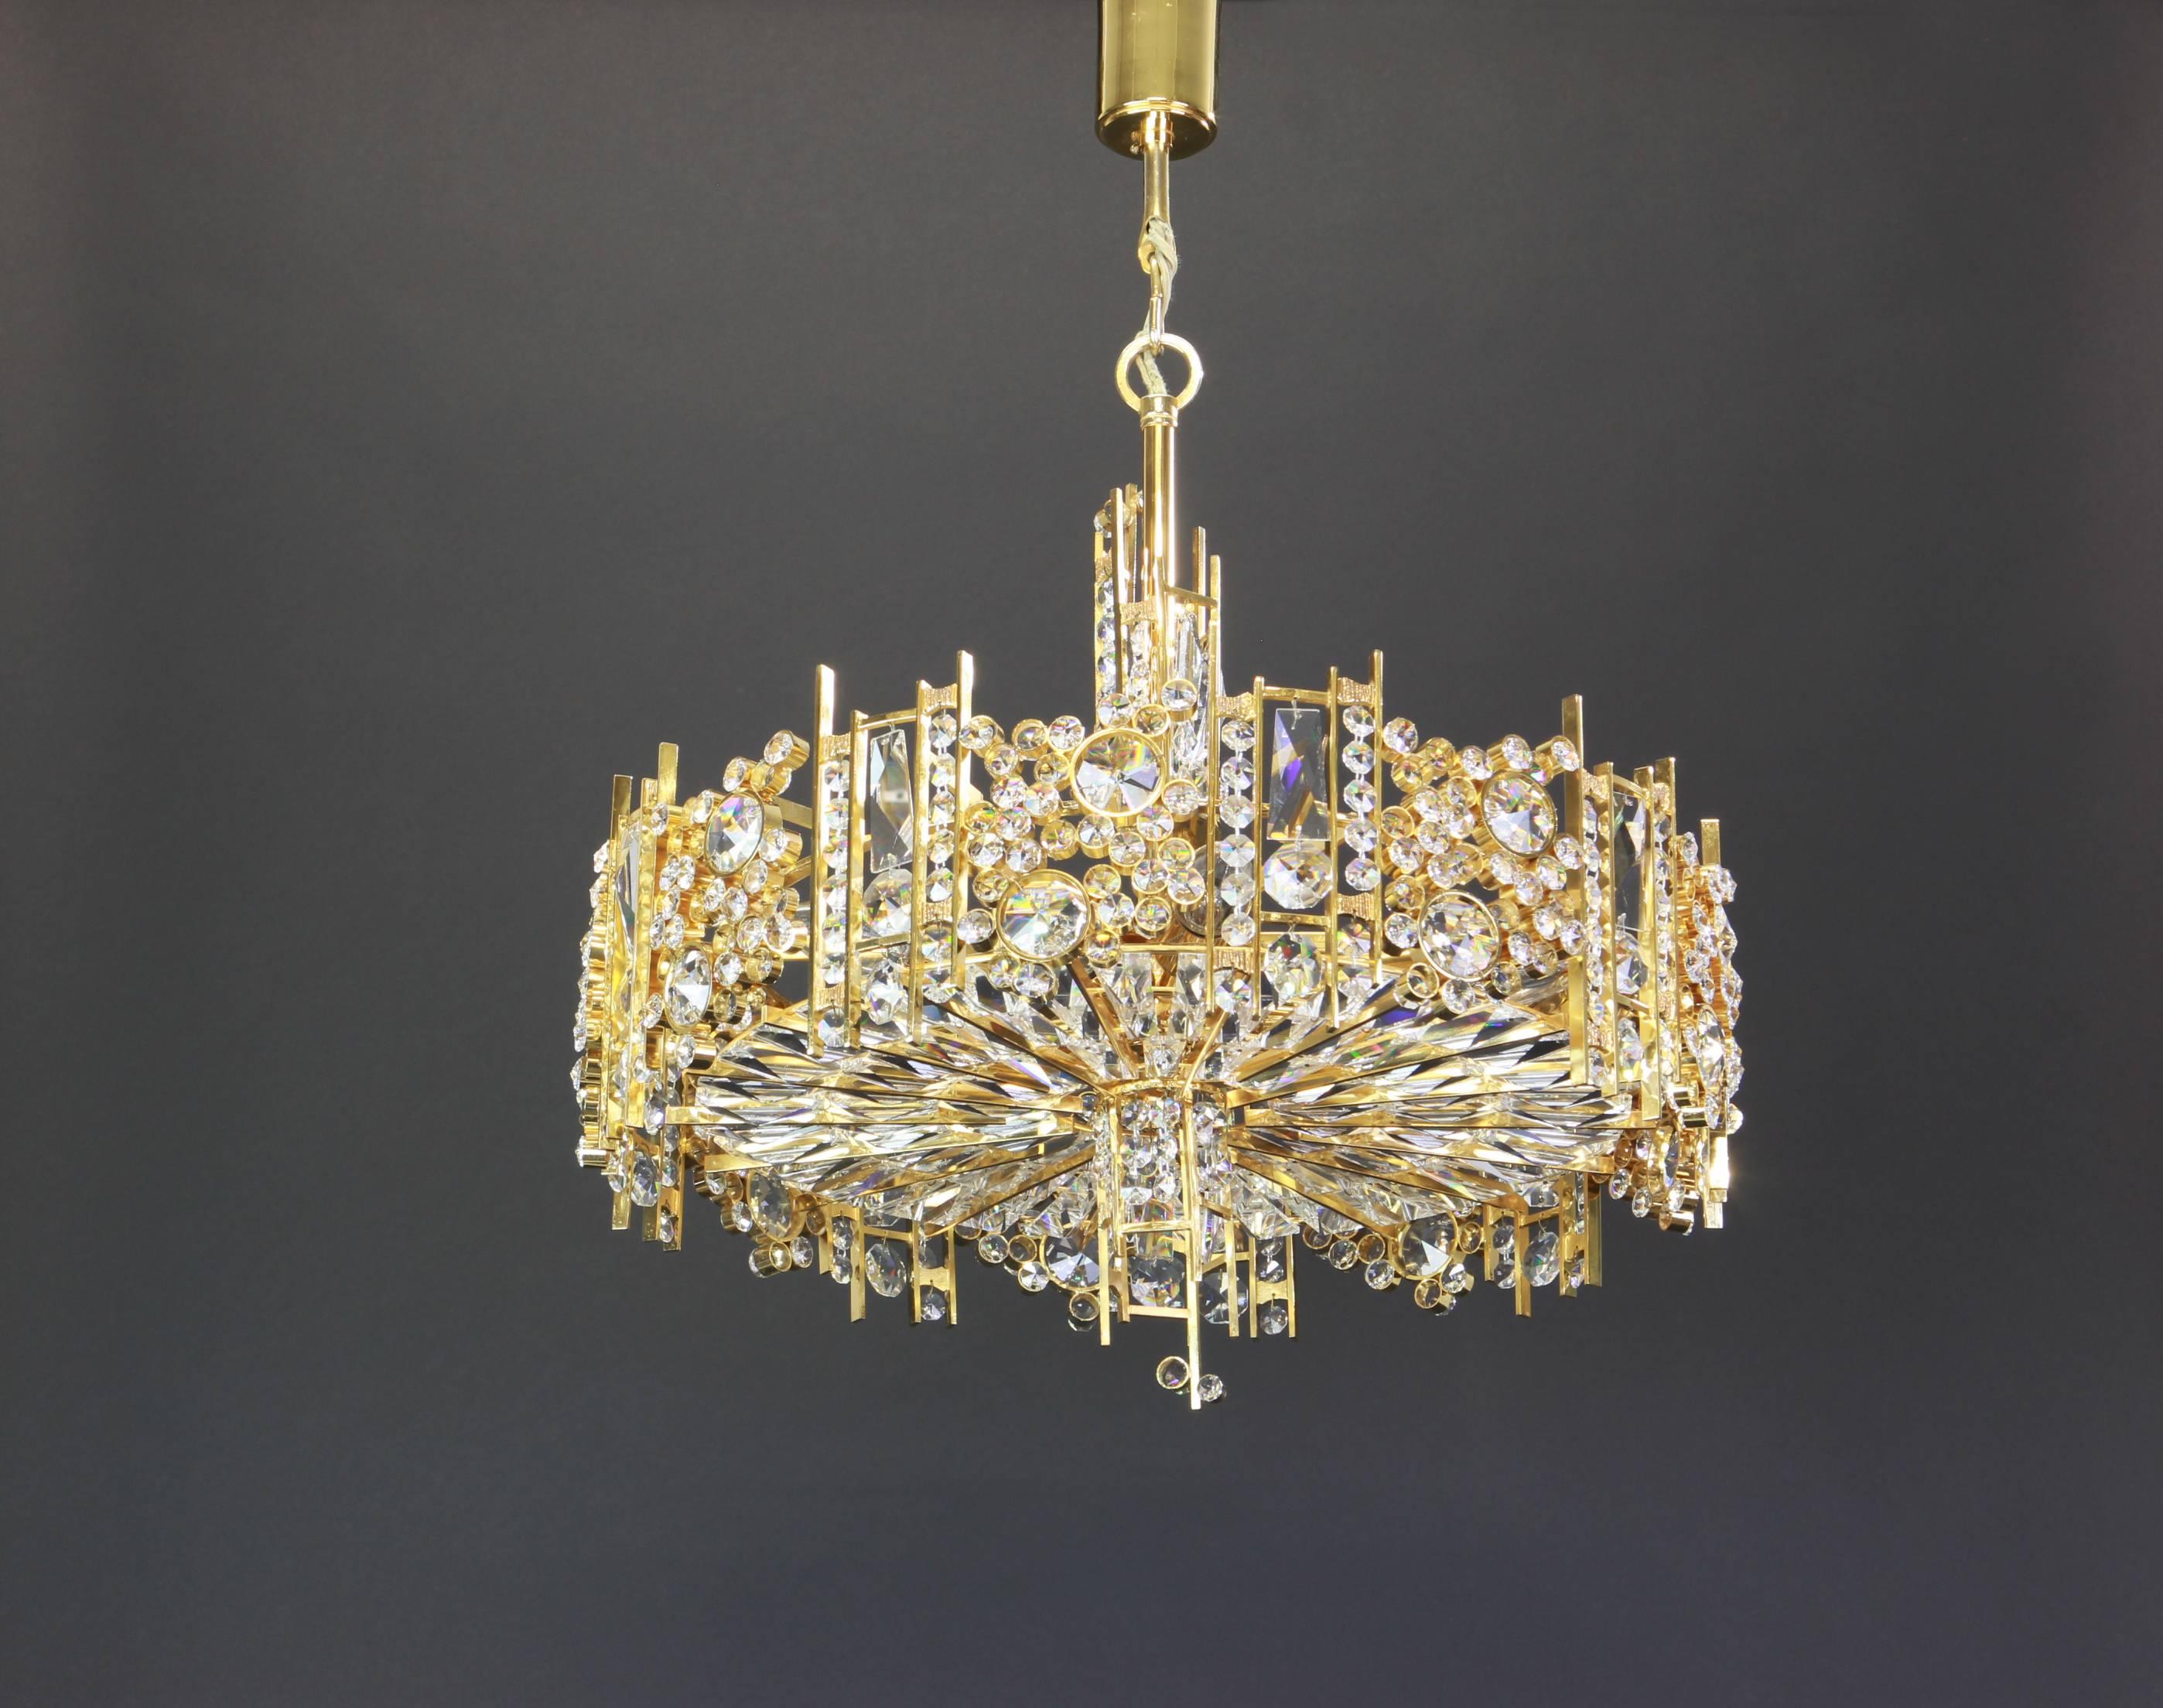 A wonderful and high quality gilded chandelier/pendant light fixture by Palwa (Palme & Walter), Germany, 1970s

It is made of a 24-carat gold-plated brass frame decorated with hundreds of cut crystal glass. The bottom is made of a round cut glass